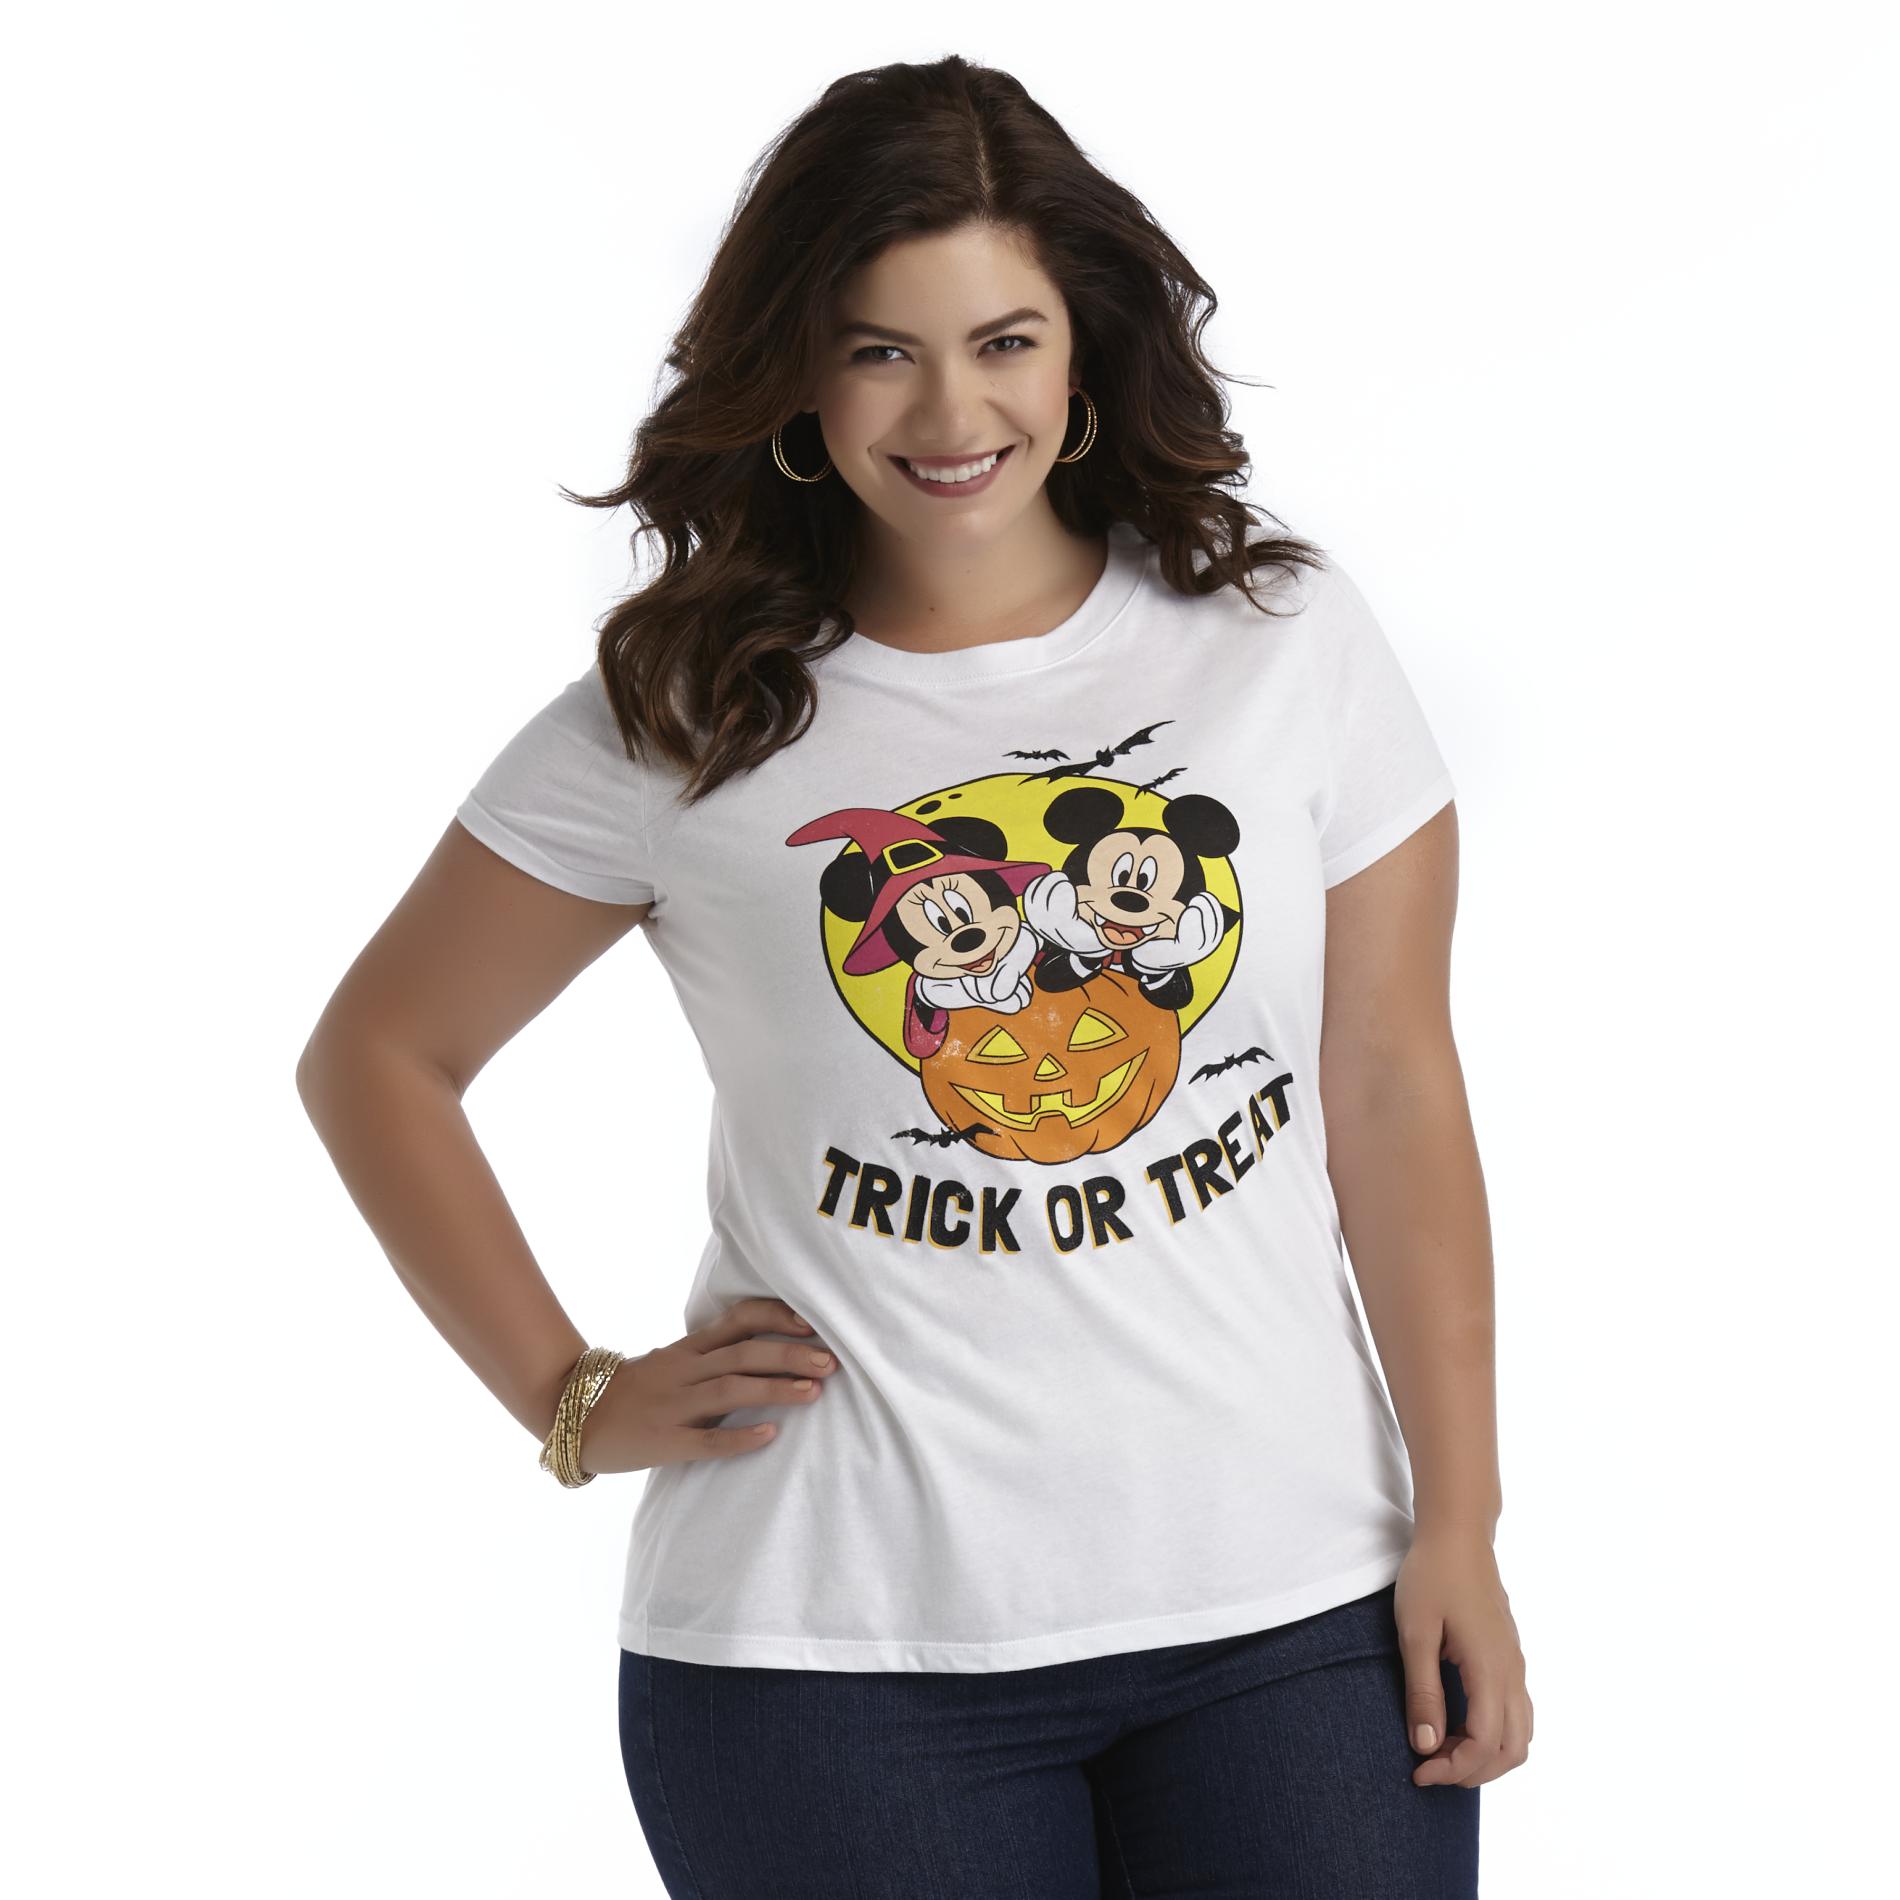 Disney Junior's Plus Halloween T-Shirt - Mickey Mouse & Minnie Mouse